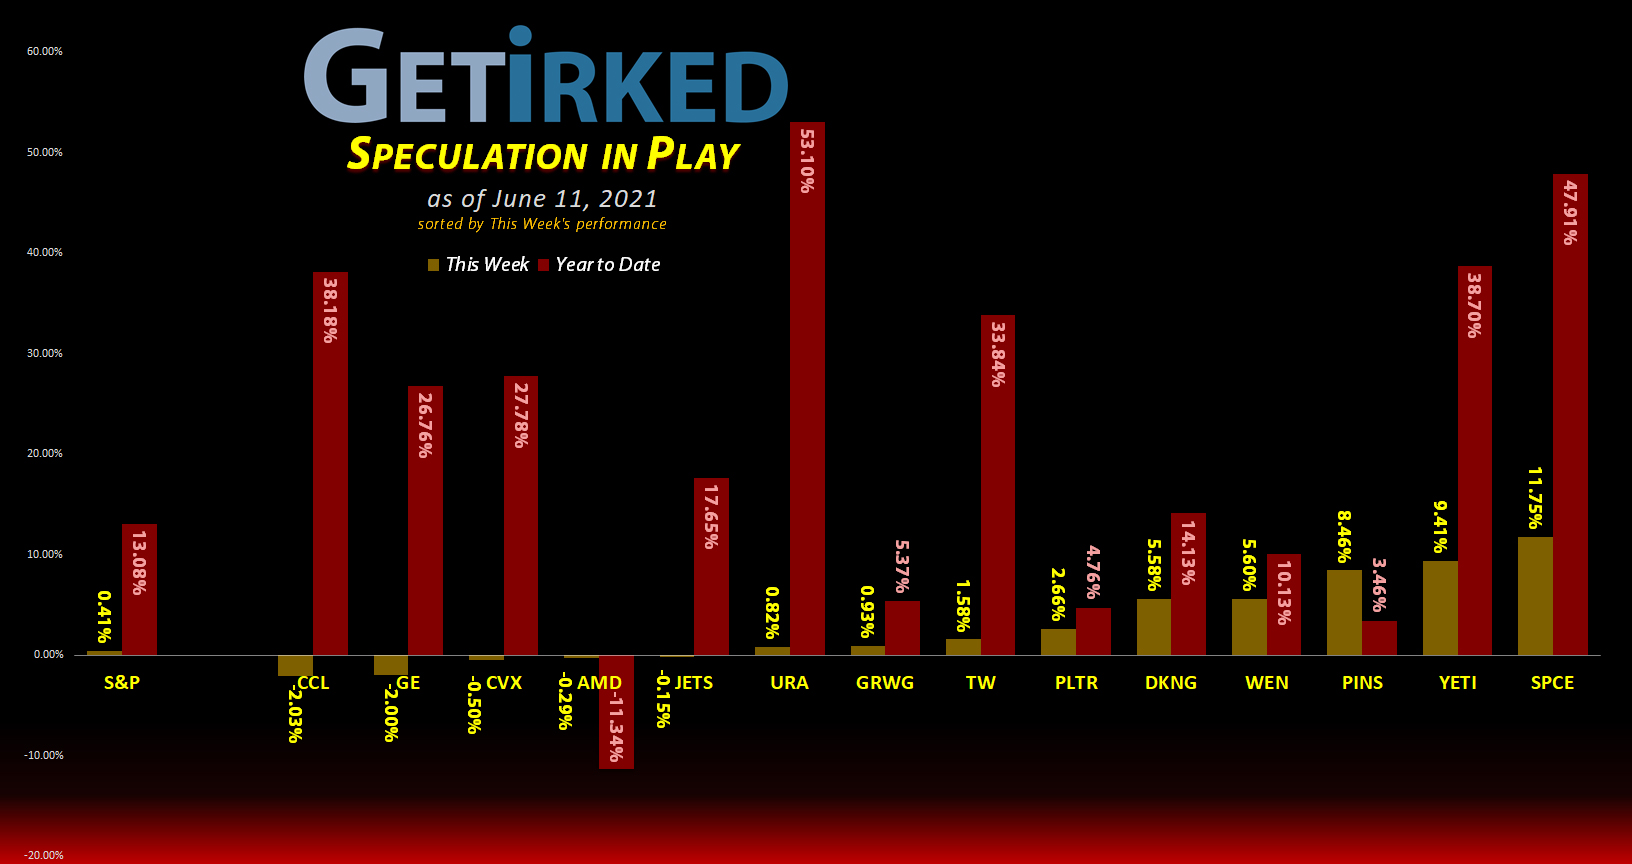 Get Irked's Speculation in Play - June 11, 2021